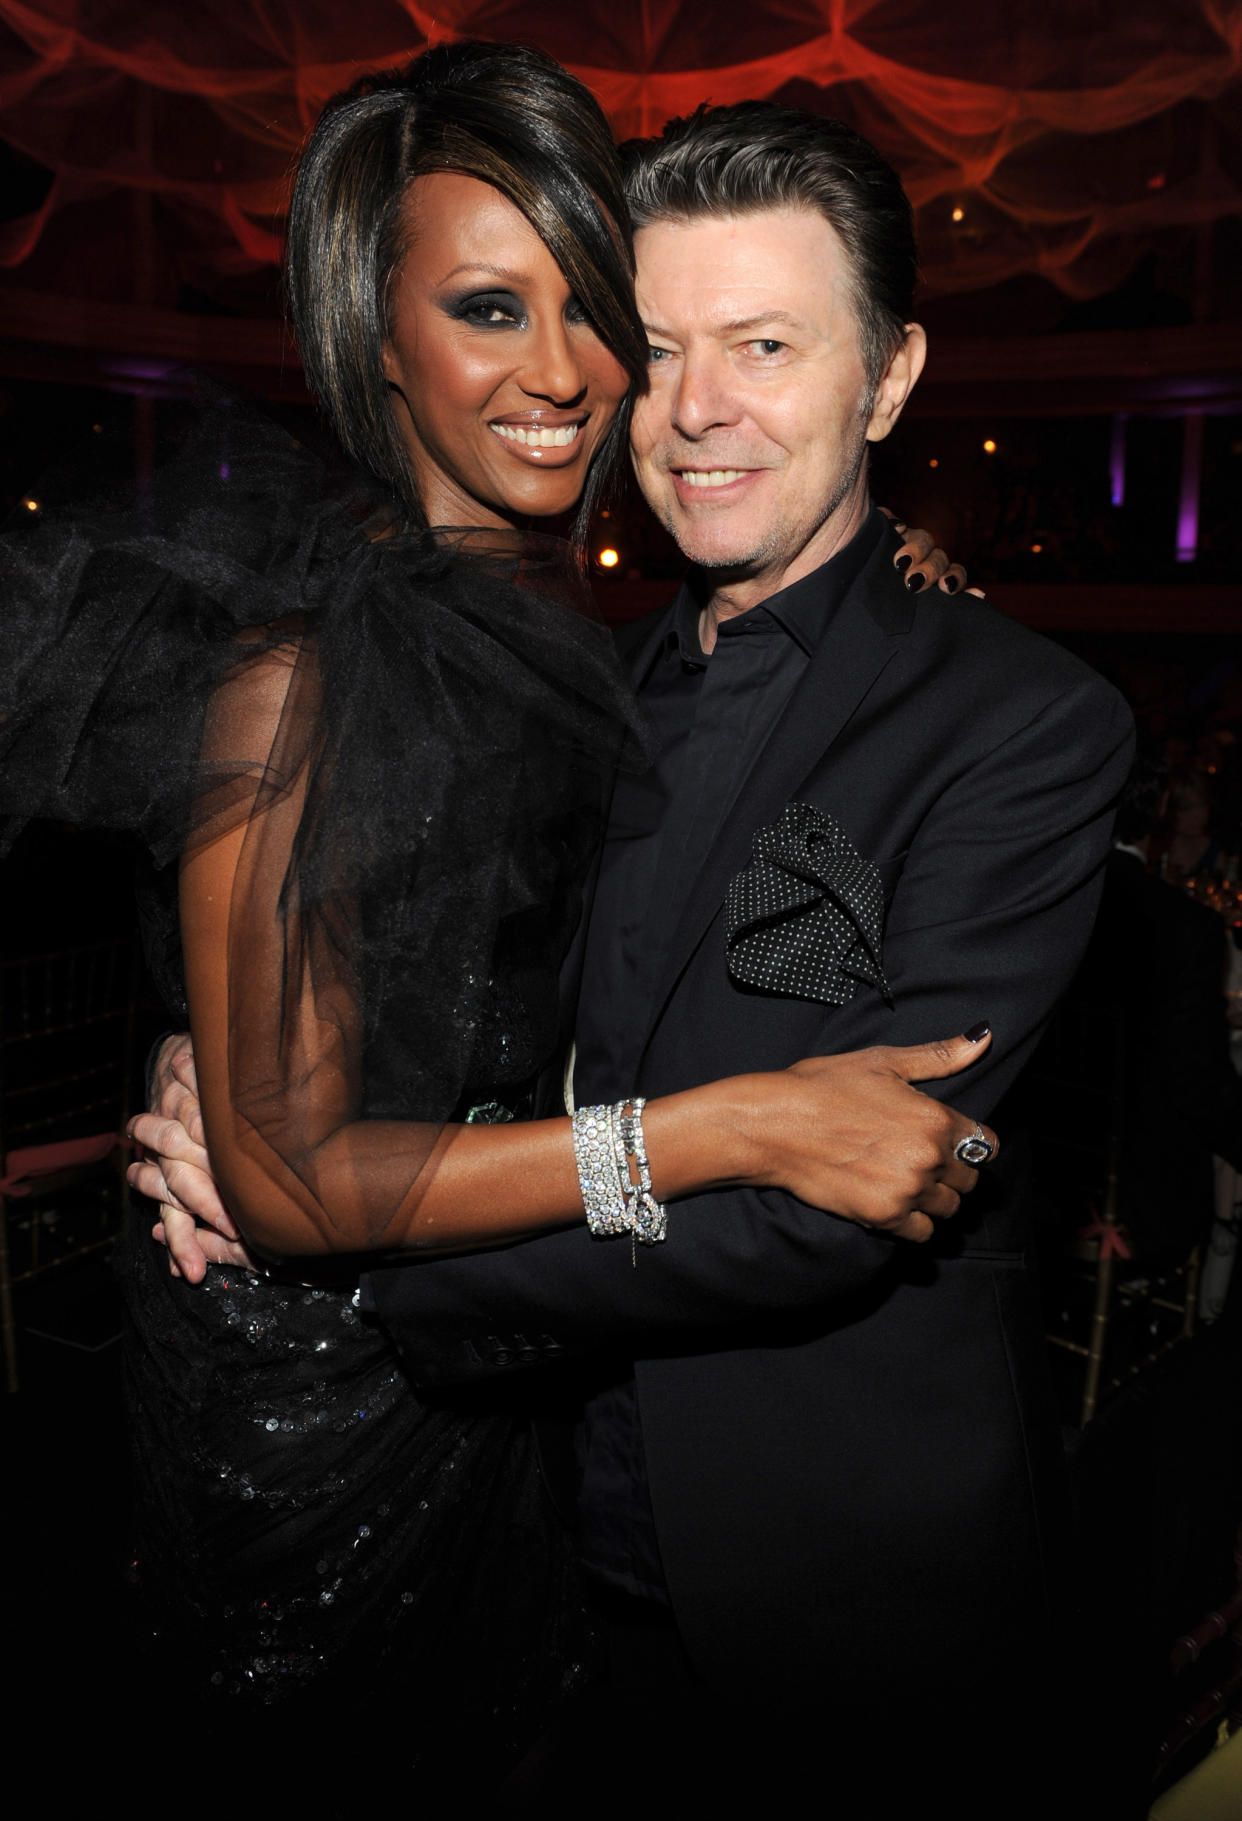 Iman and David Bowie in NYC in 2009. (Photo: Kevin Mazur/WireImage)